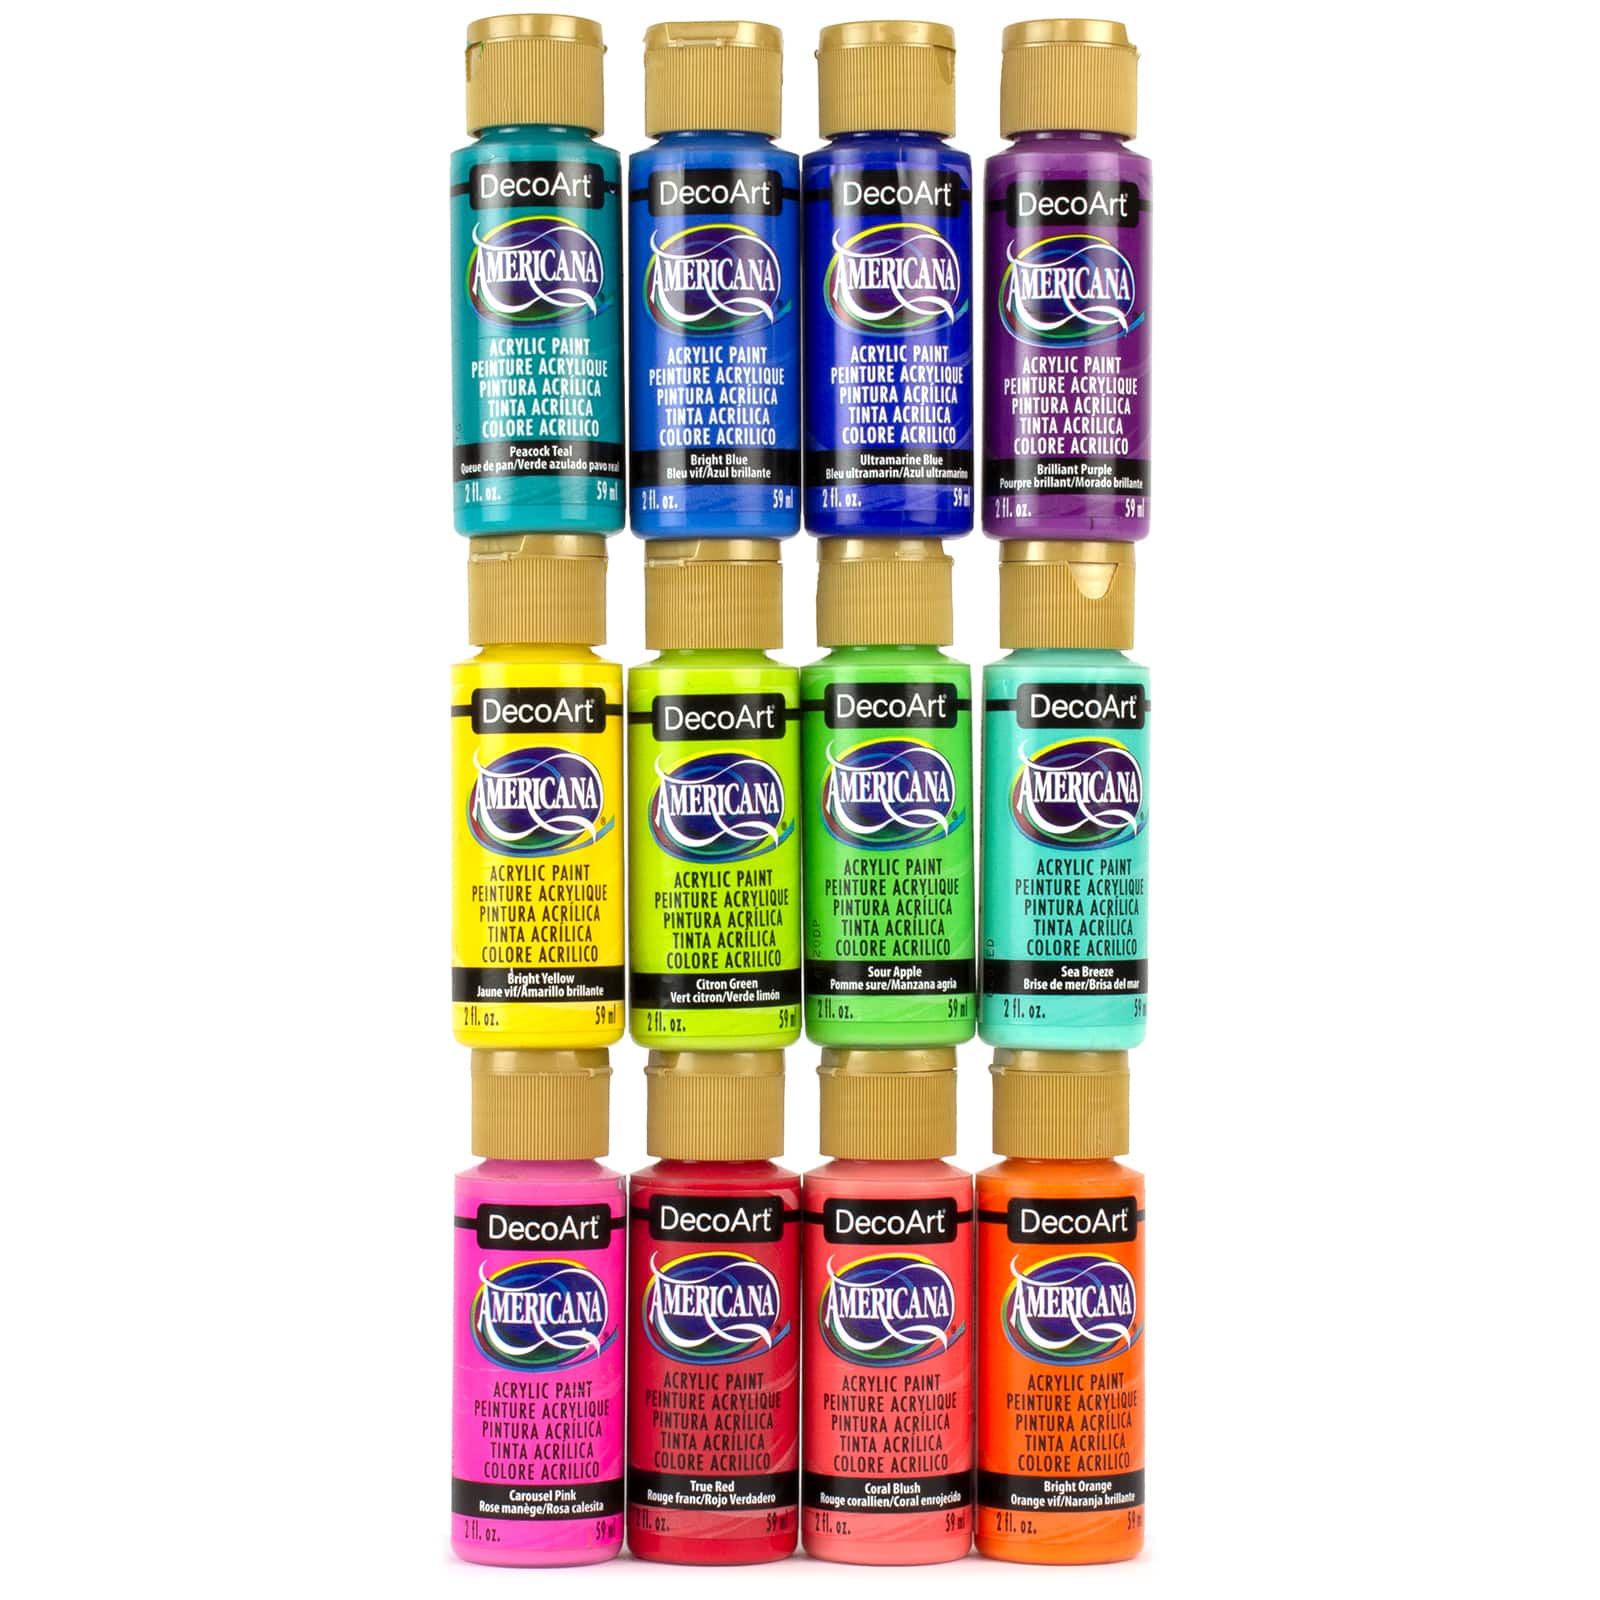 Shop for the DecoArt® Americana® Premium Acrylic Paint Value Pack at